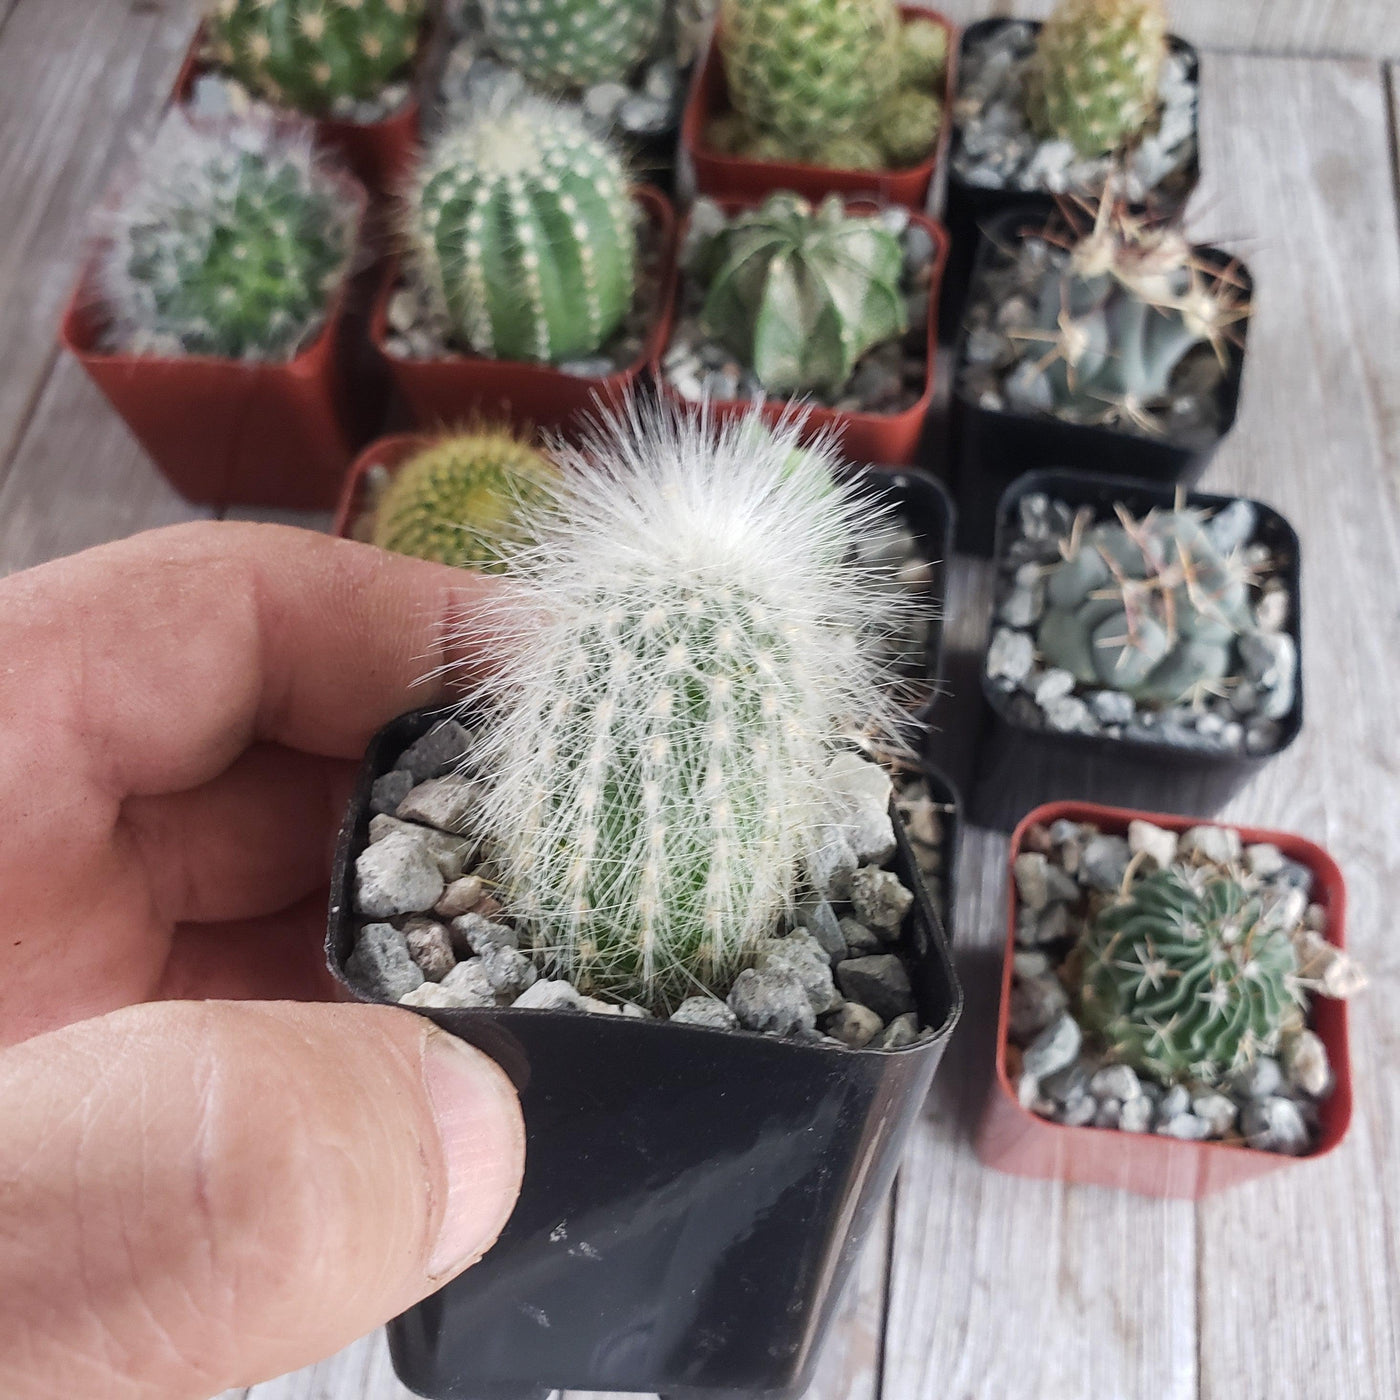 Assorted 2-Inch Cactus (9-Pack)